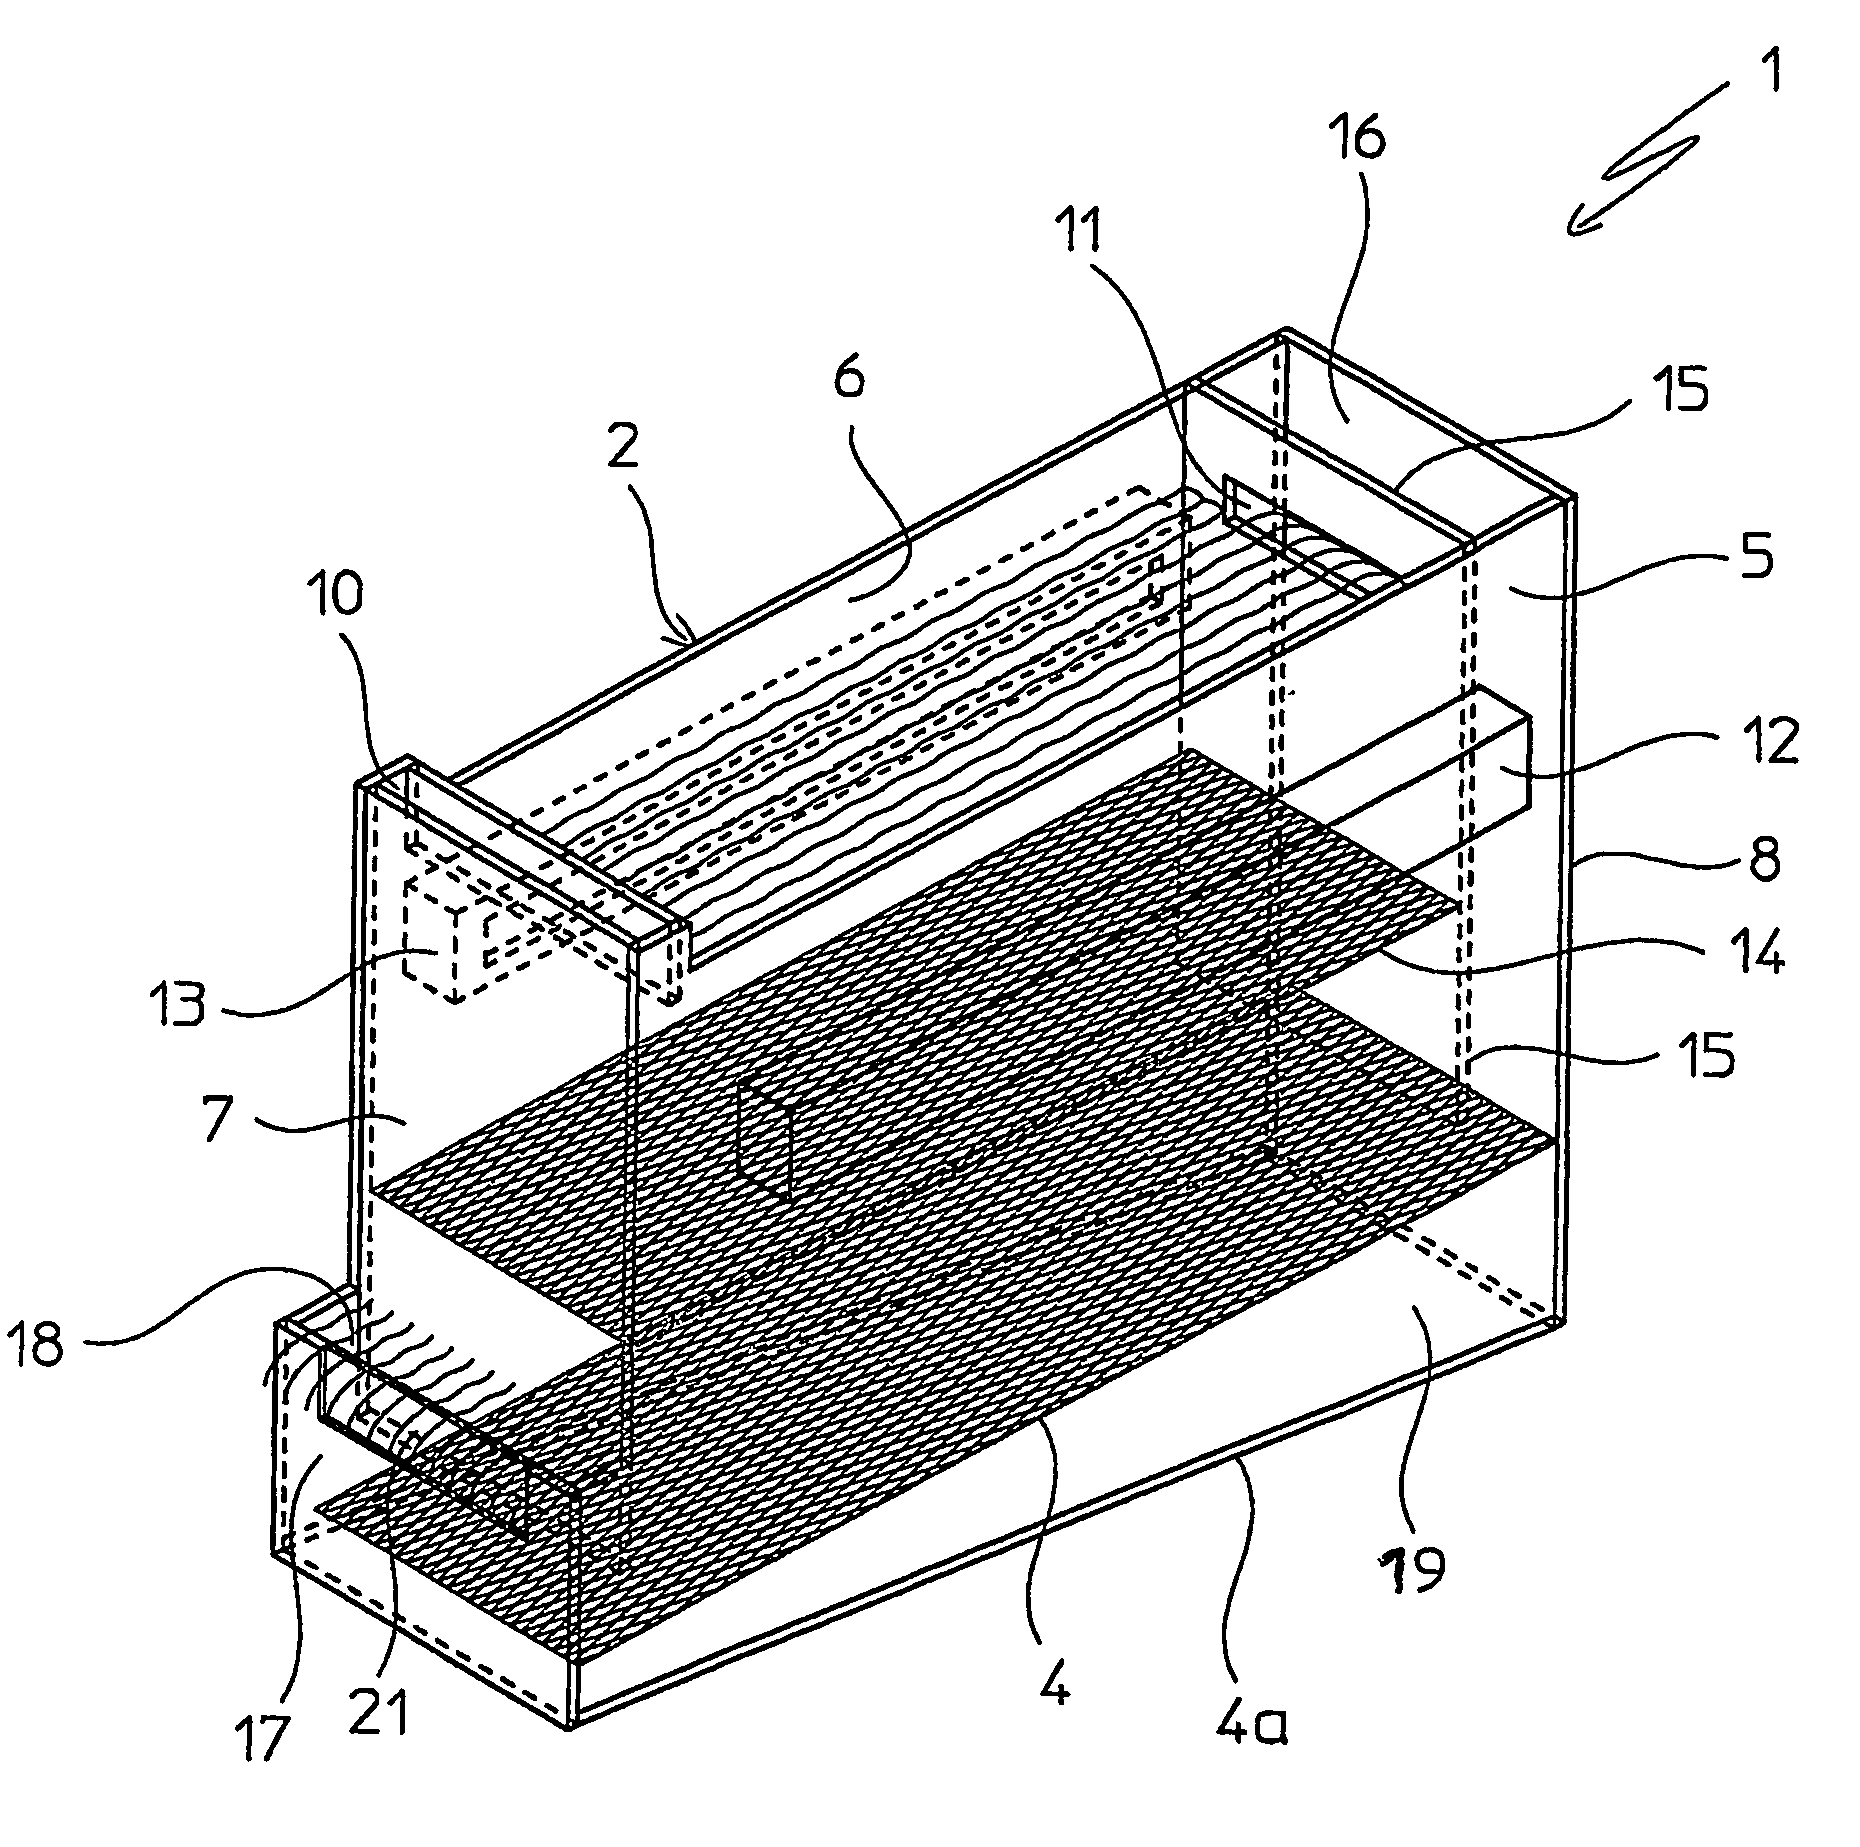 Fluid bed granulation process and apparatus